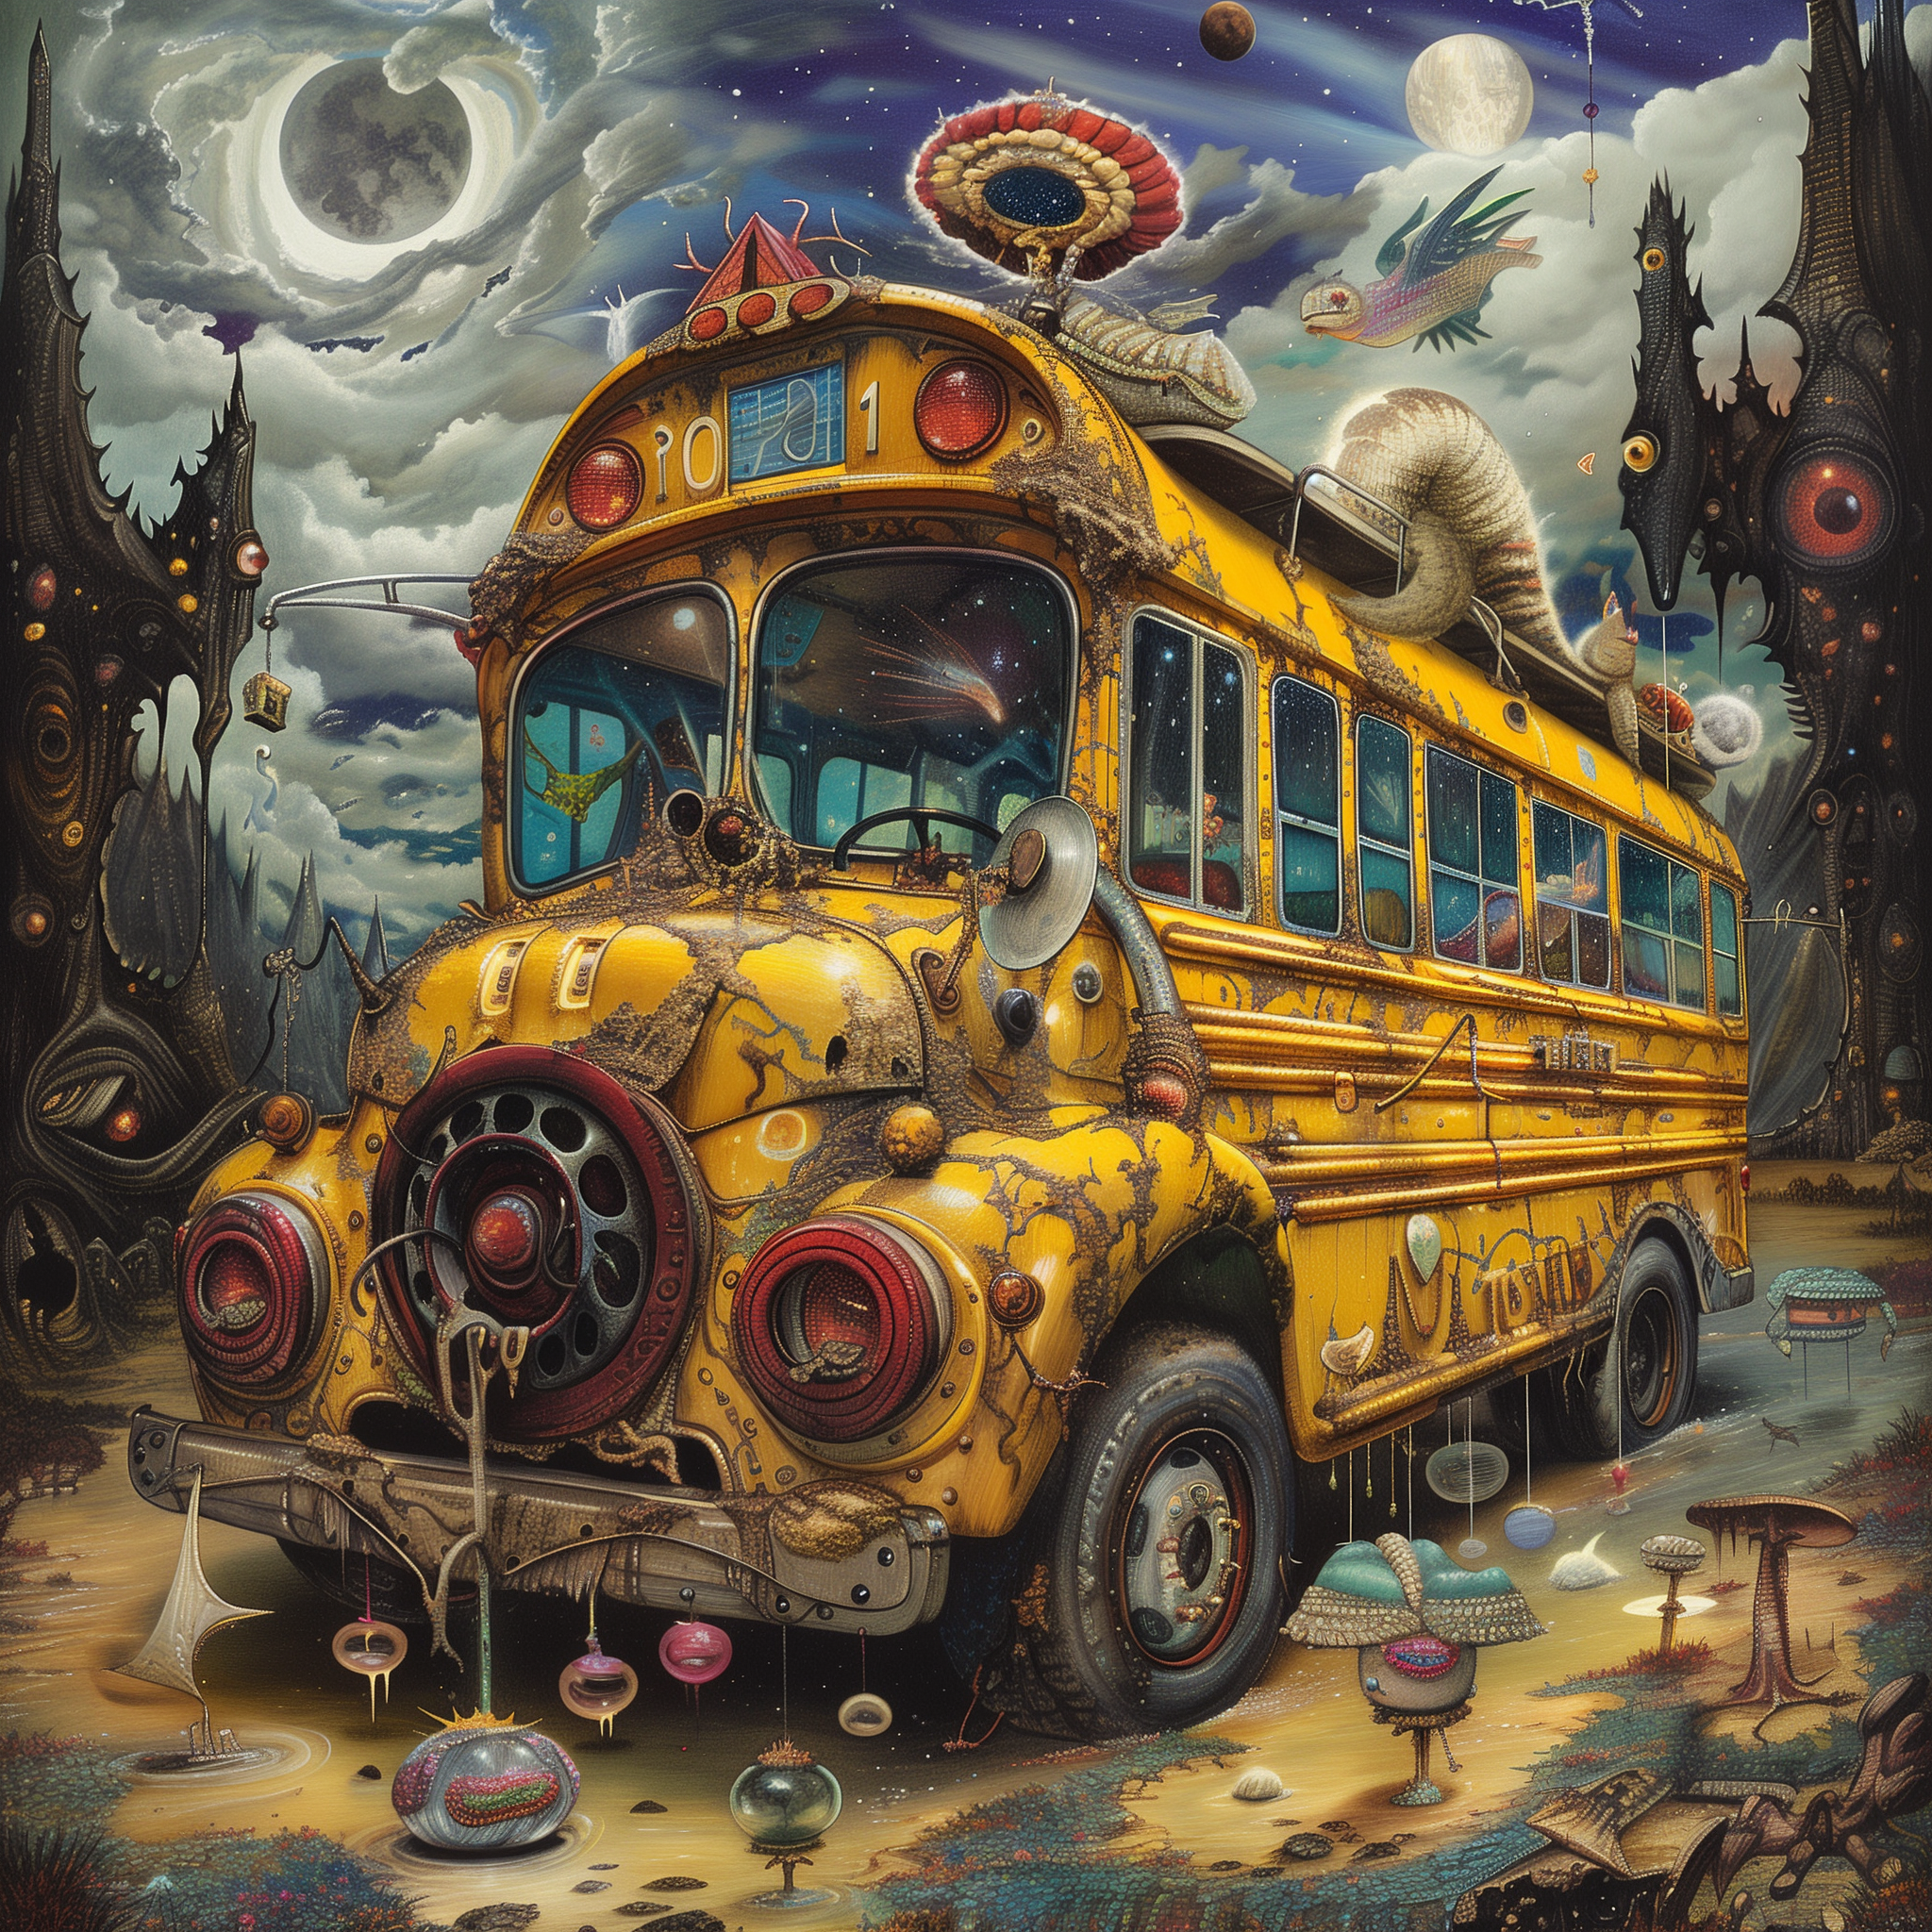 Surreal artwork of a yellow school bus with whimsical features for a creative avatar or profile picture.